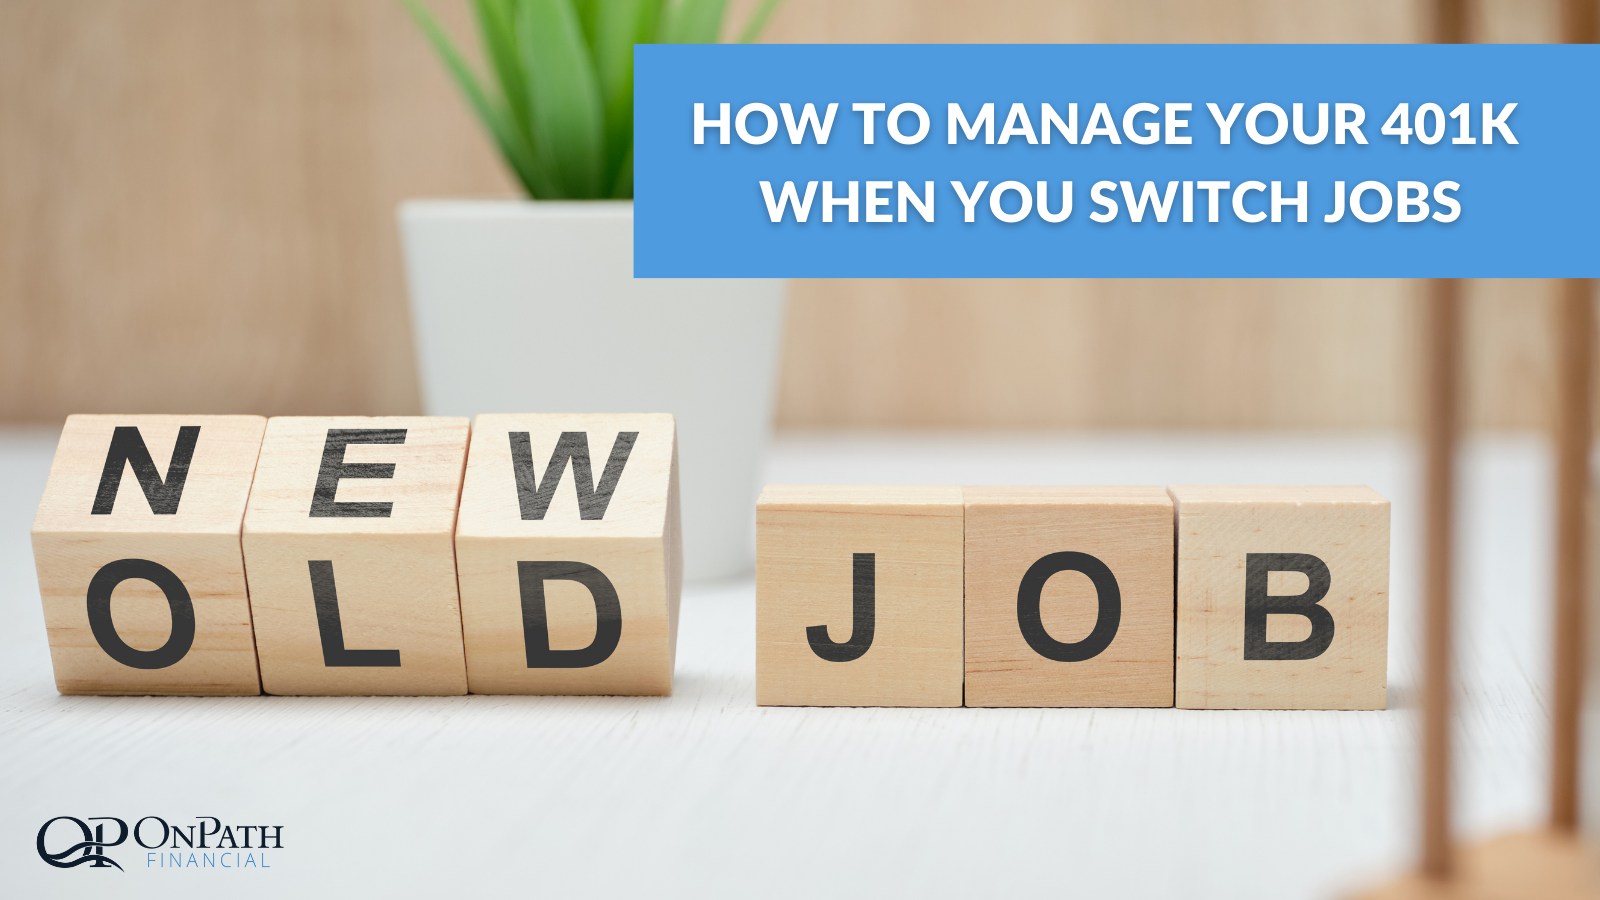 How to manage your 401k when you switch jobs